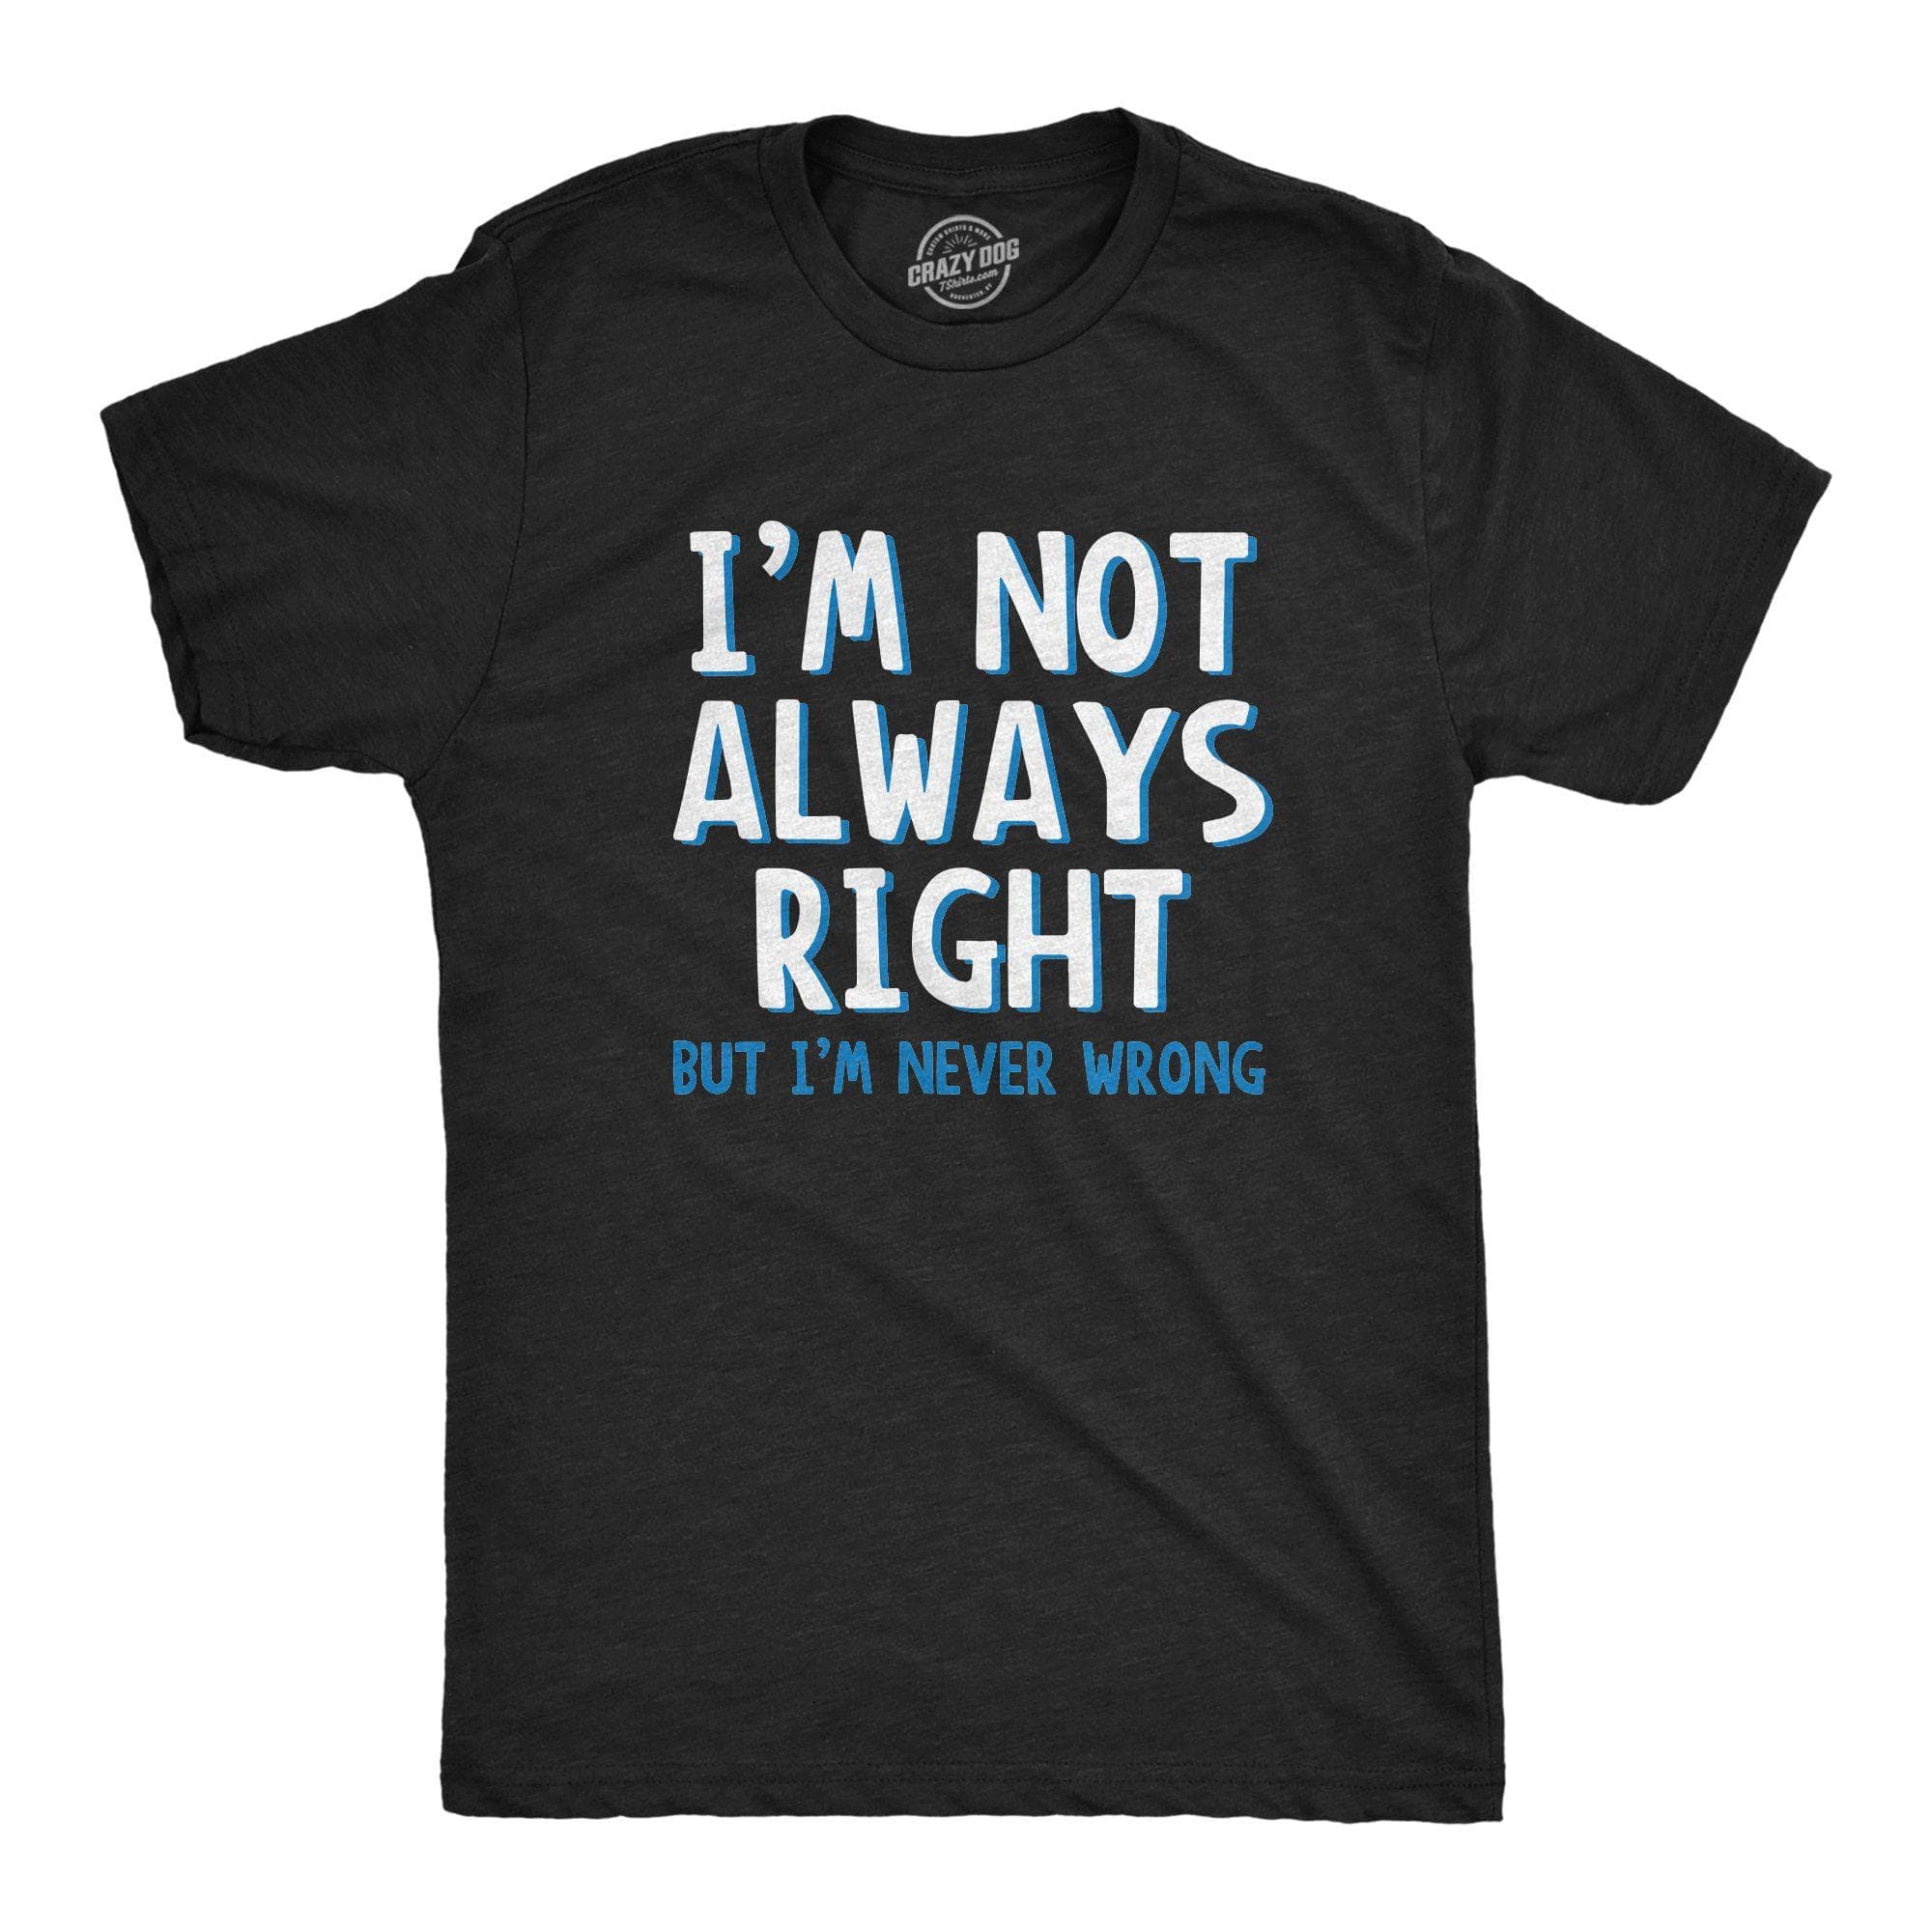 I'm Not Always Right But I'm Never Wrong Men's Tshirt  -  Crazy Dog T-Shirts